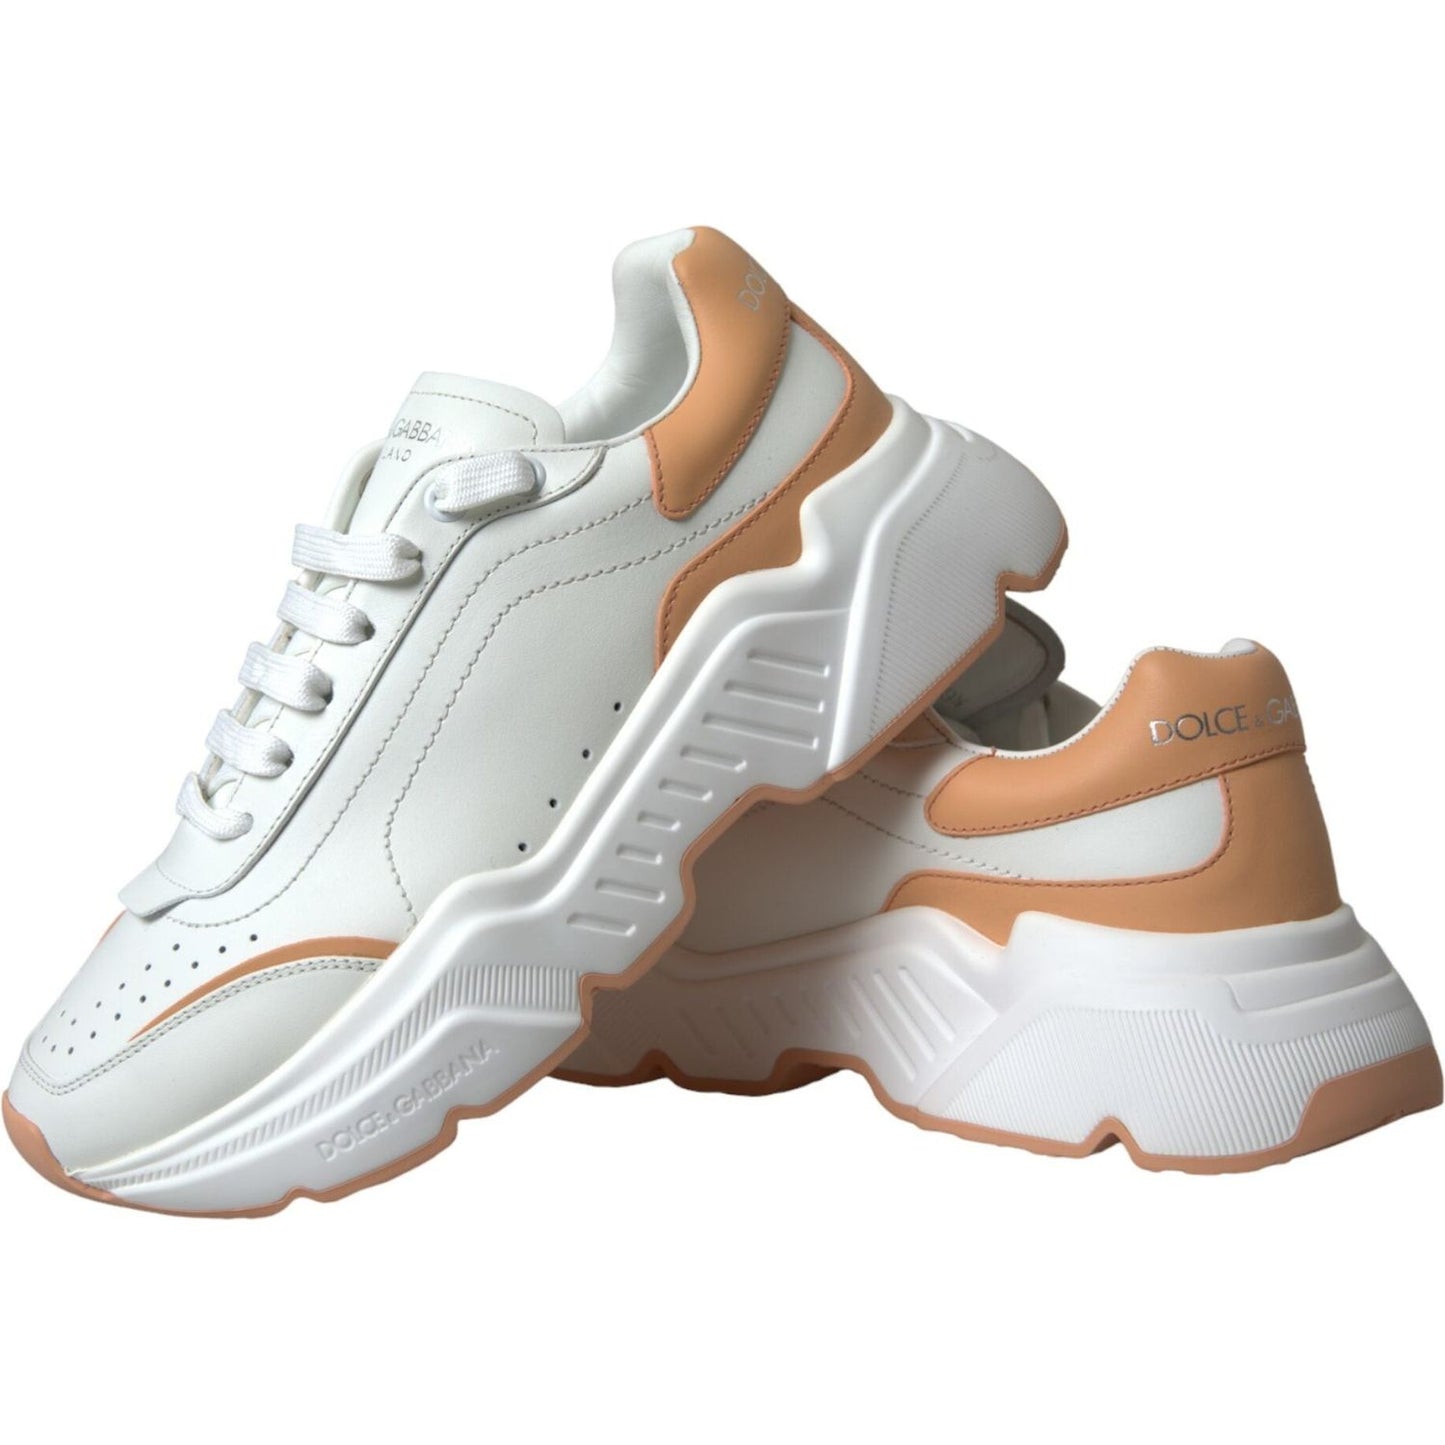 Dolce & Gabbana White Peach DAYMASTER Leather Sneakers Shoes white-peach-daymaster-leather-sneakers-shoes